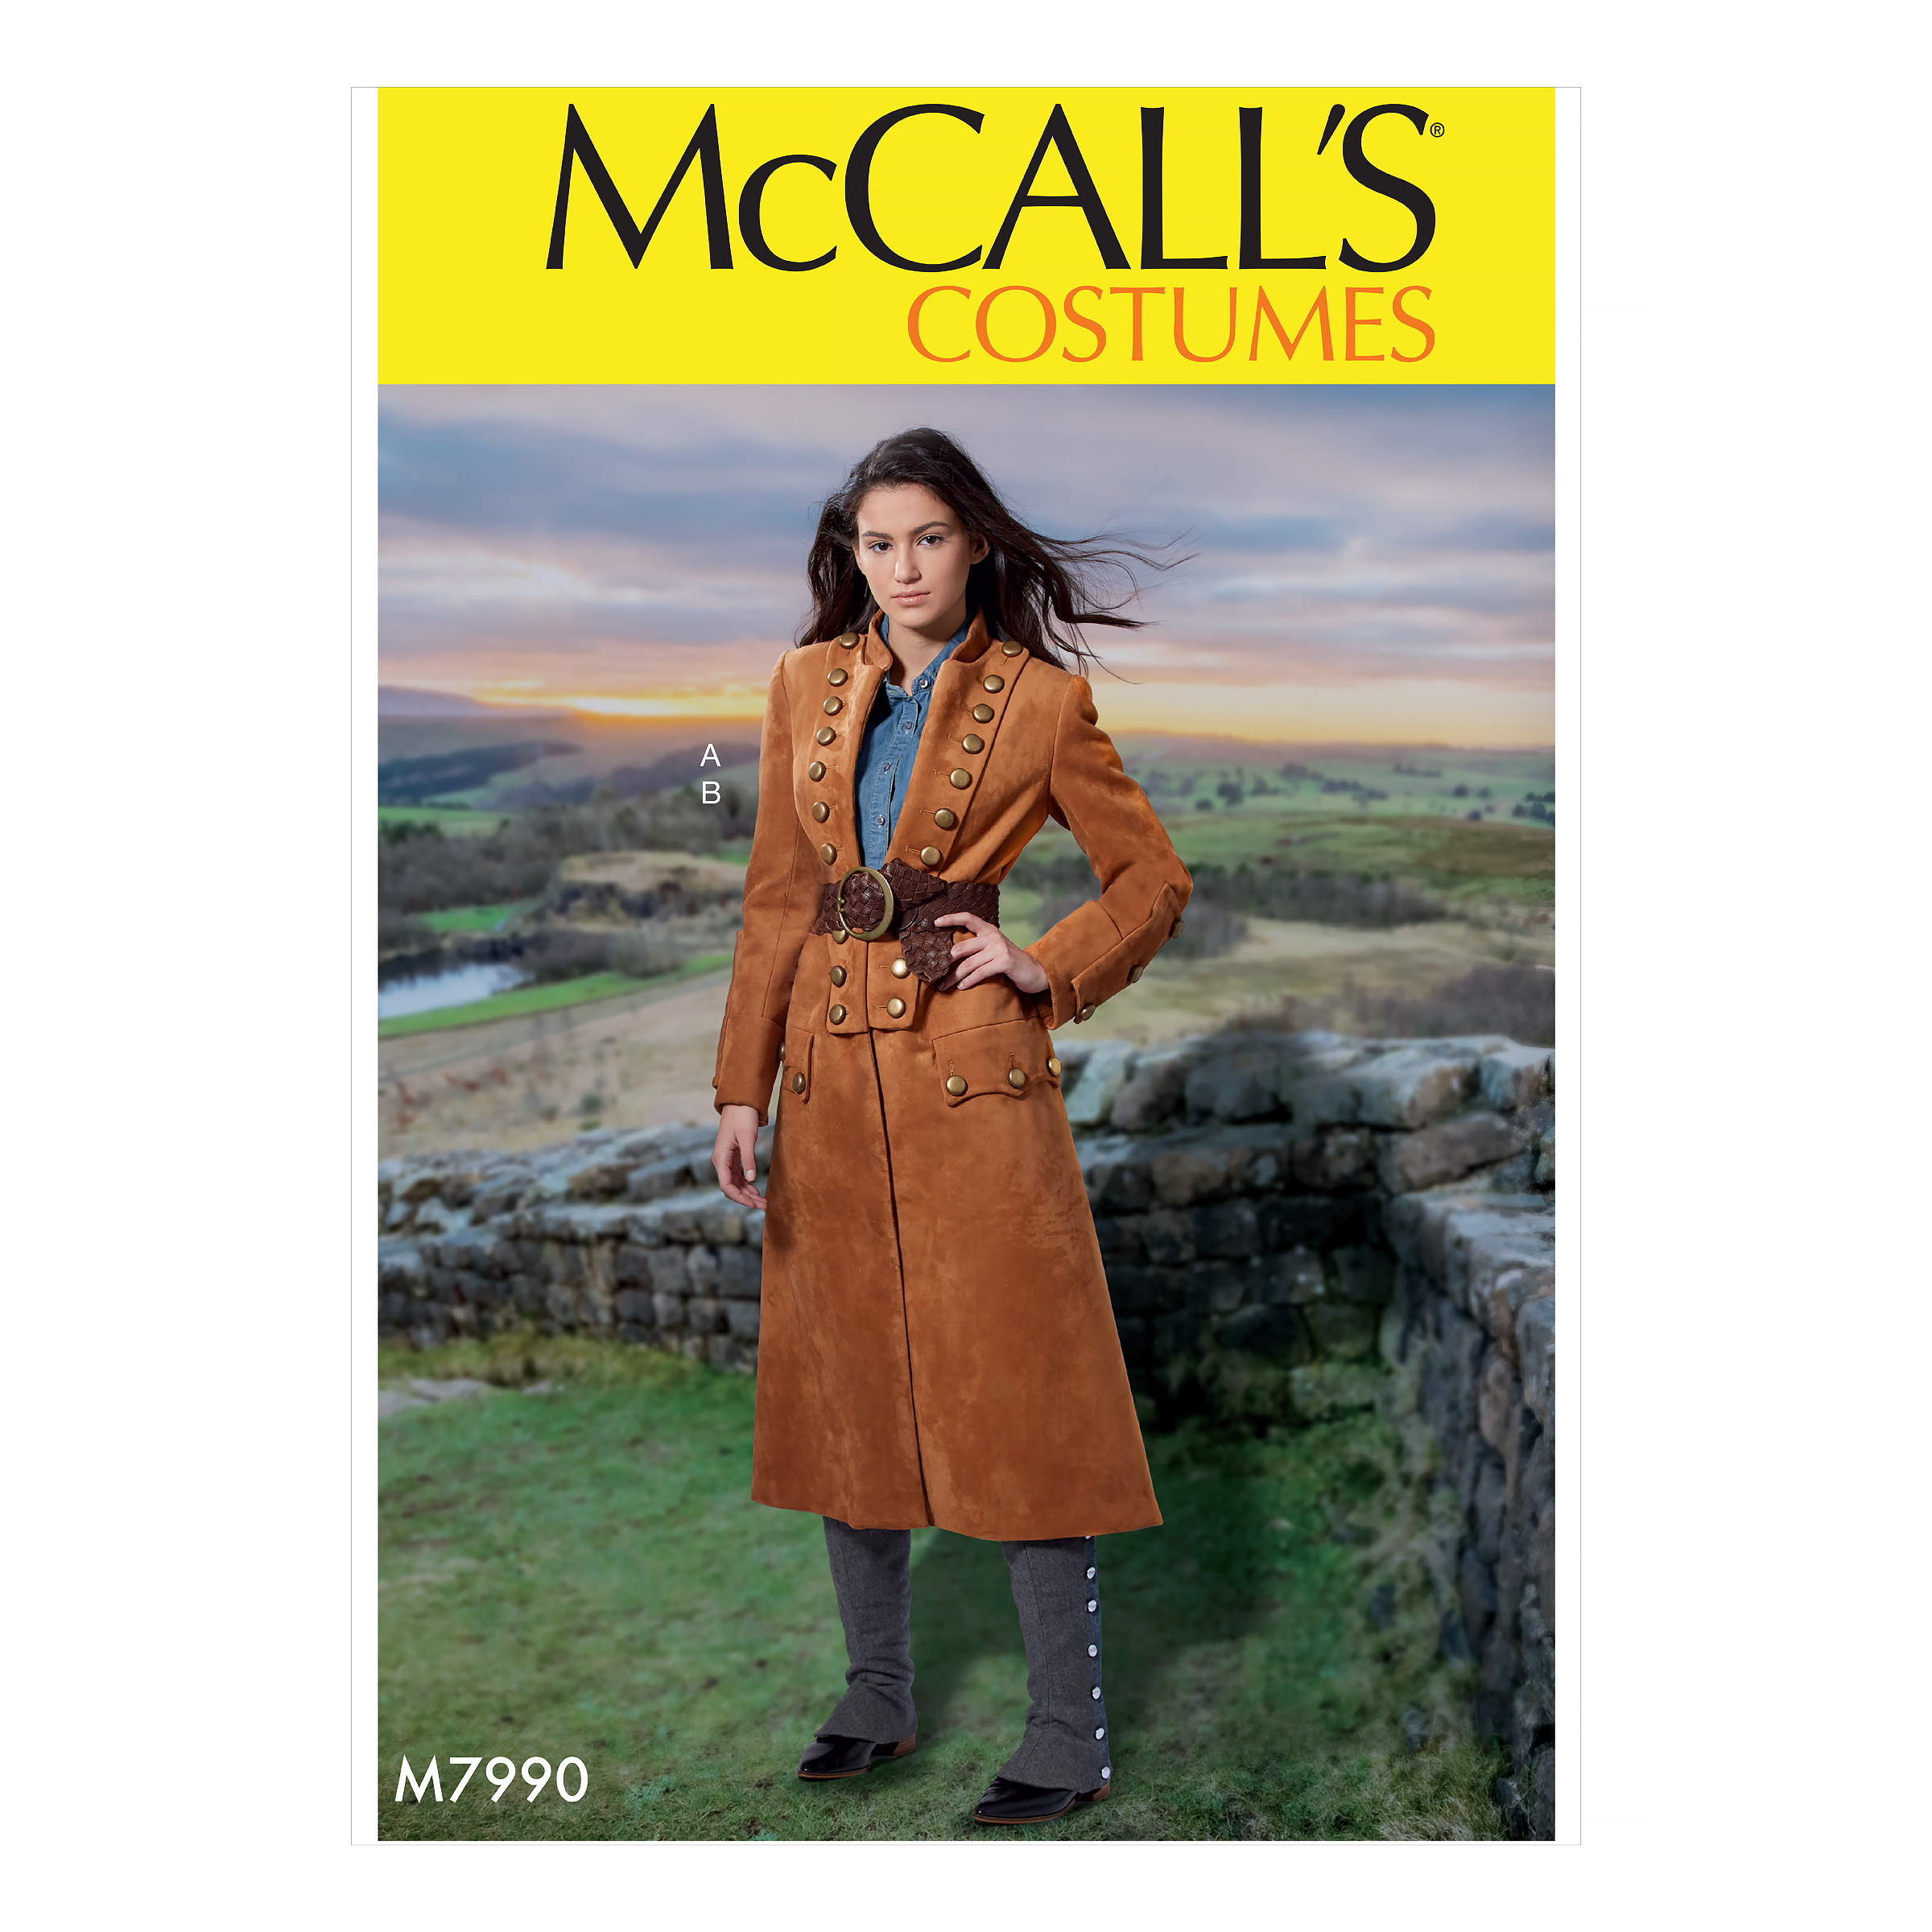 McCalls Pattern M7220 Misses' Pioneer Costumes from £10.50